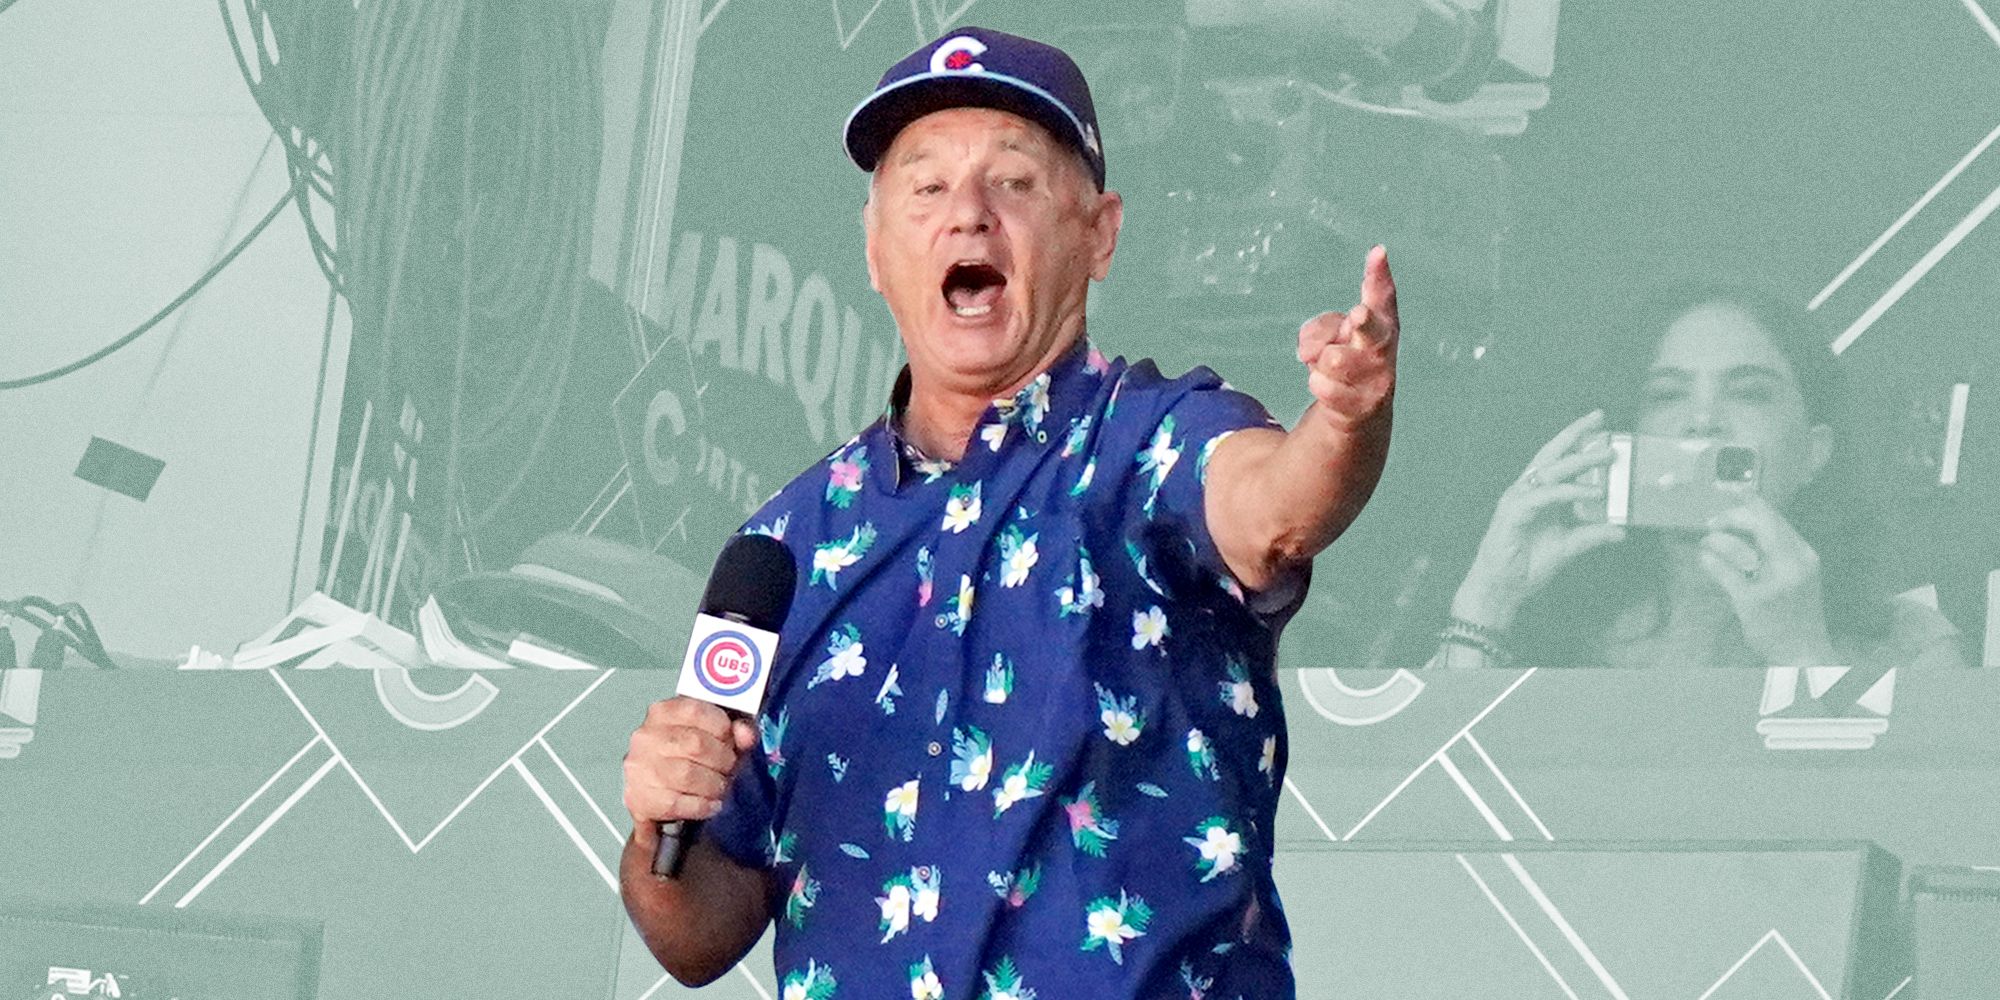 Bill Murray Crashed the White House Press Briefing in Full Chicago Cubs Gear